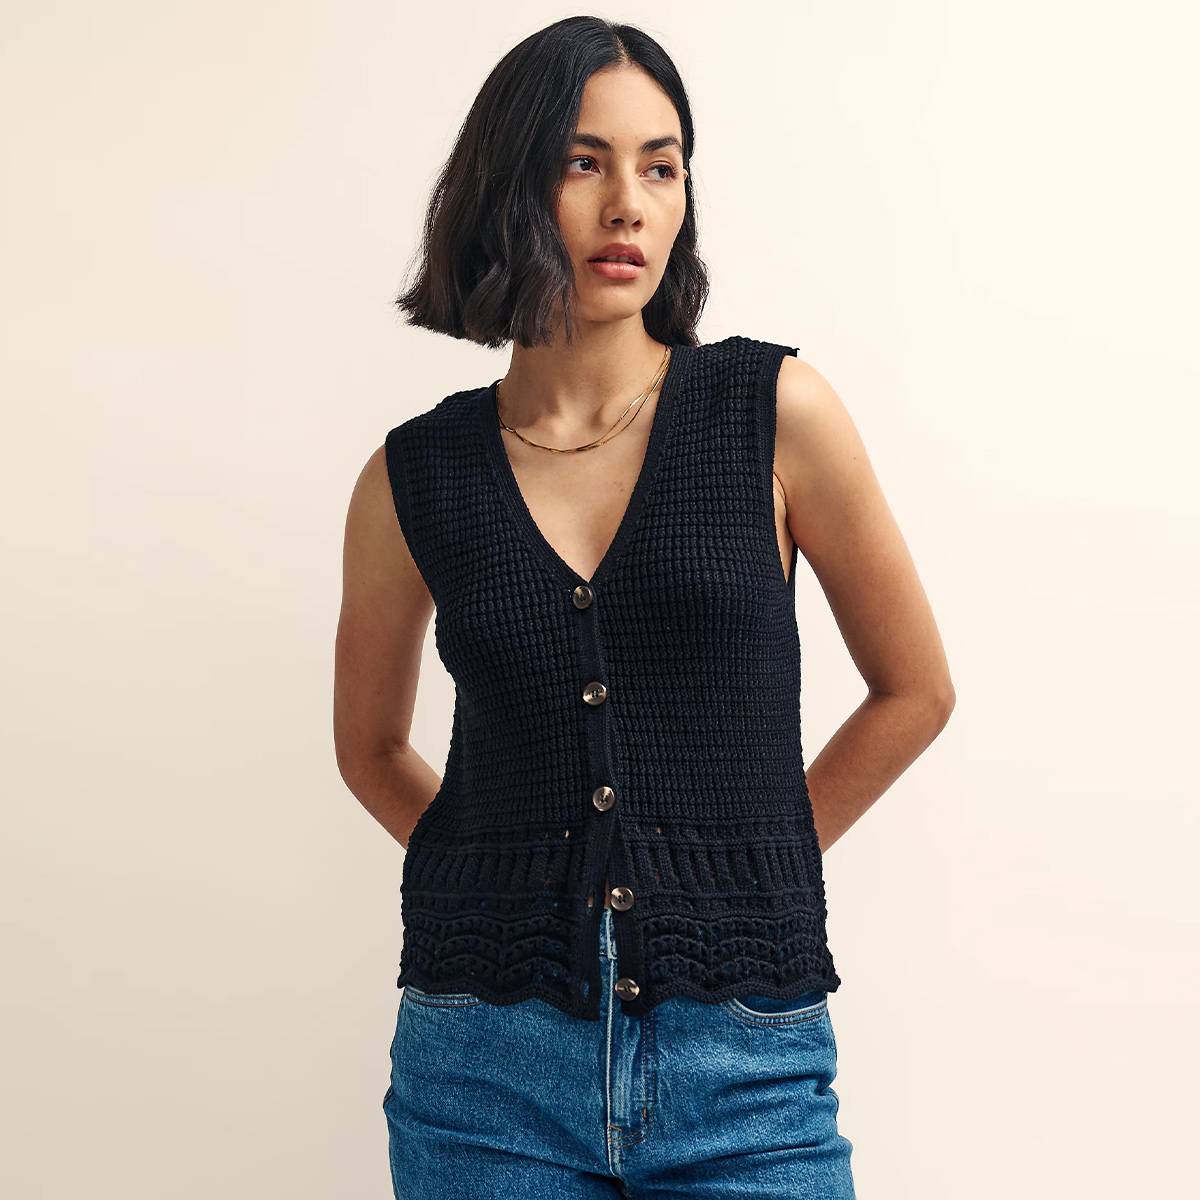 Woman wearing black sleeveless cardigan and blue jeans 